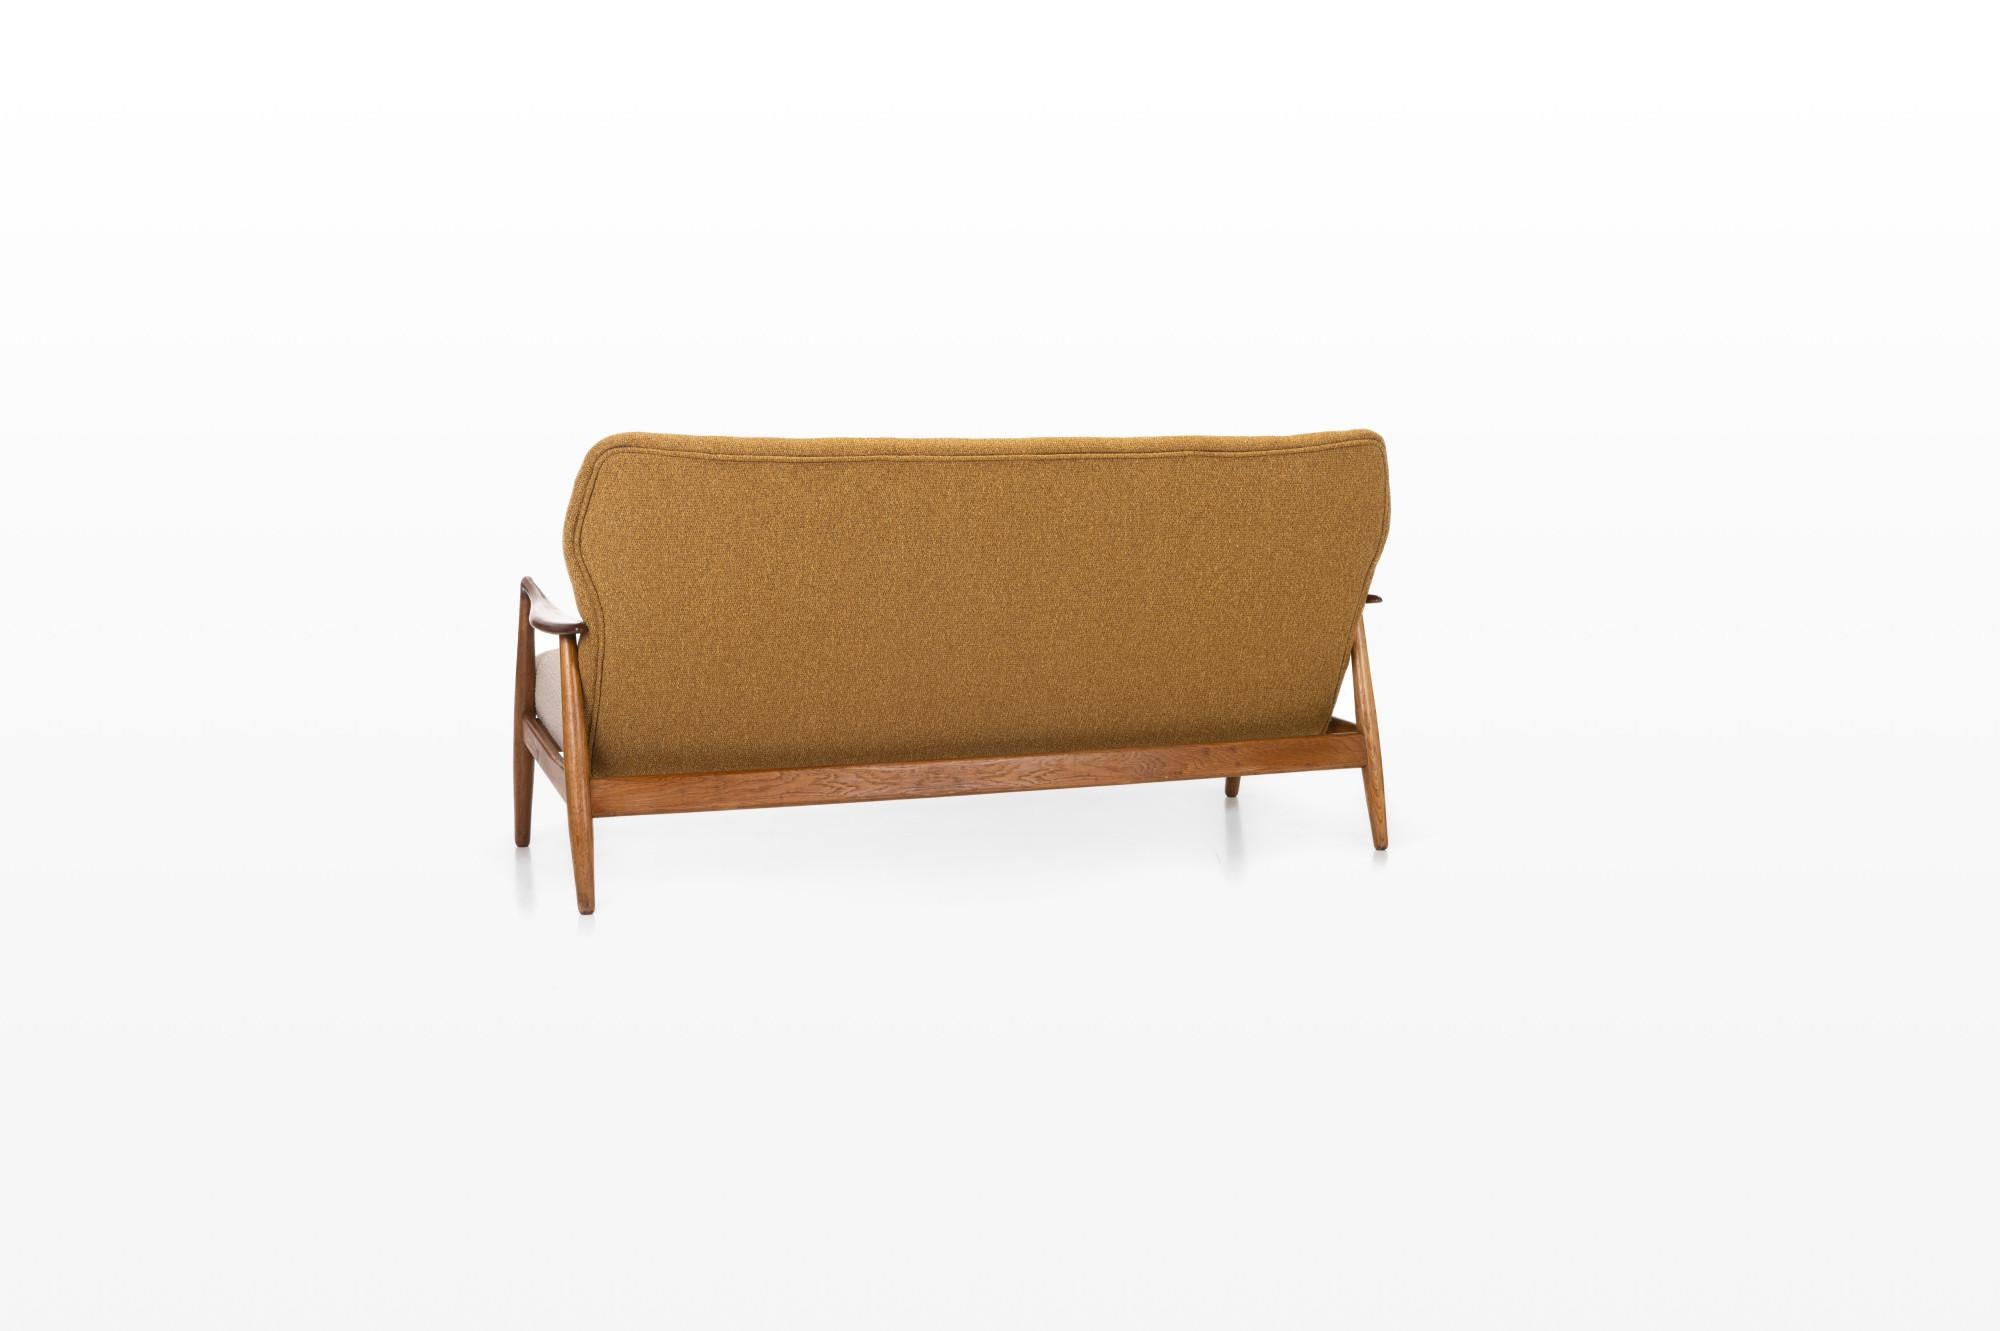 Mette' sofa designed by Arnold Madsen & Henry Schubell for Bovenkamp, Netherlands 1950s. The sofa is made of teak and oak. The sofa has been completely renovated and reupholstered with an ocher yellow and cream beige fabric.